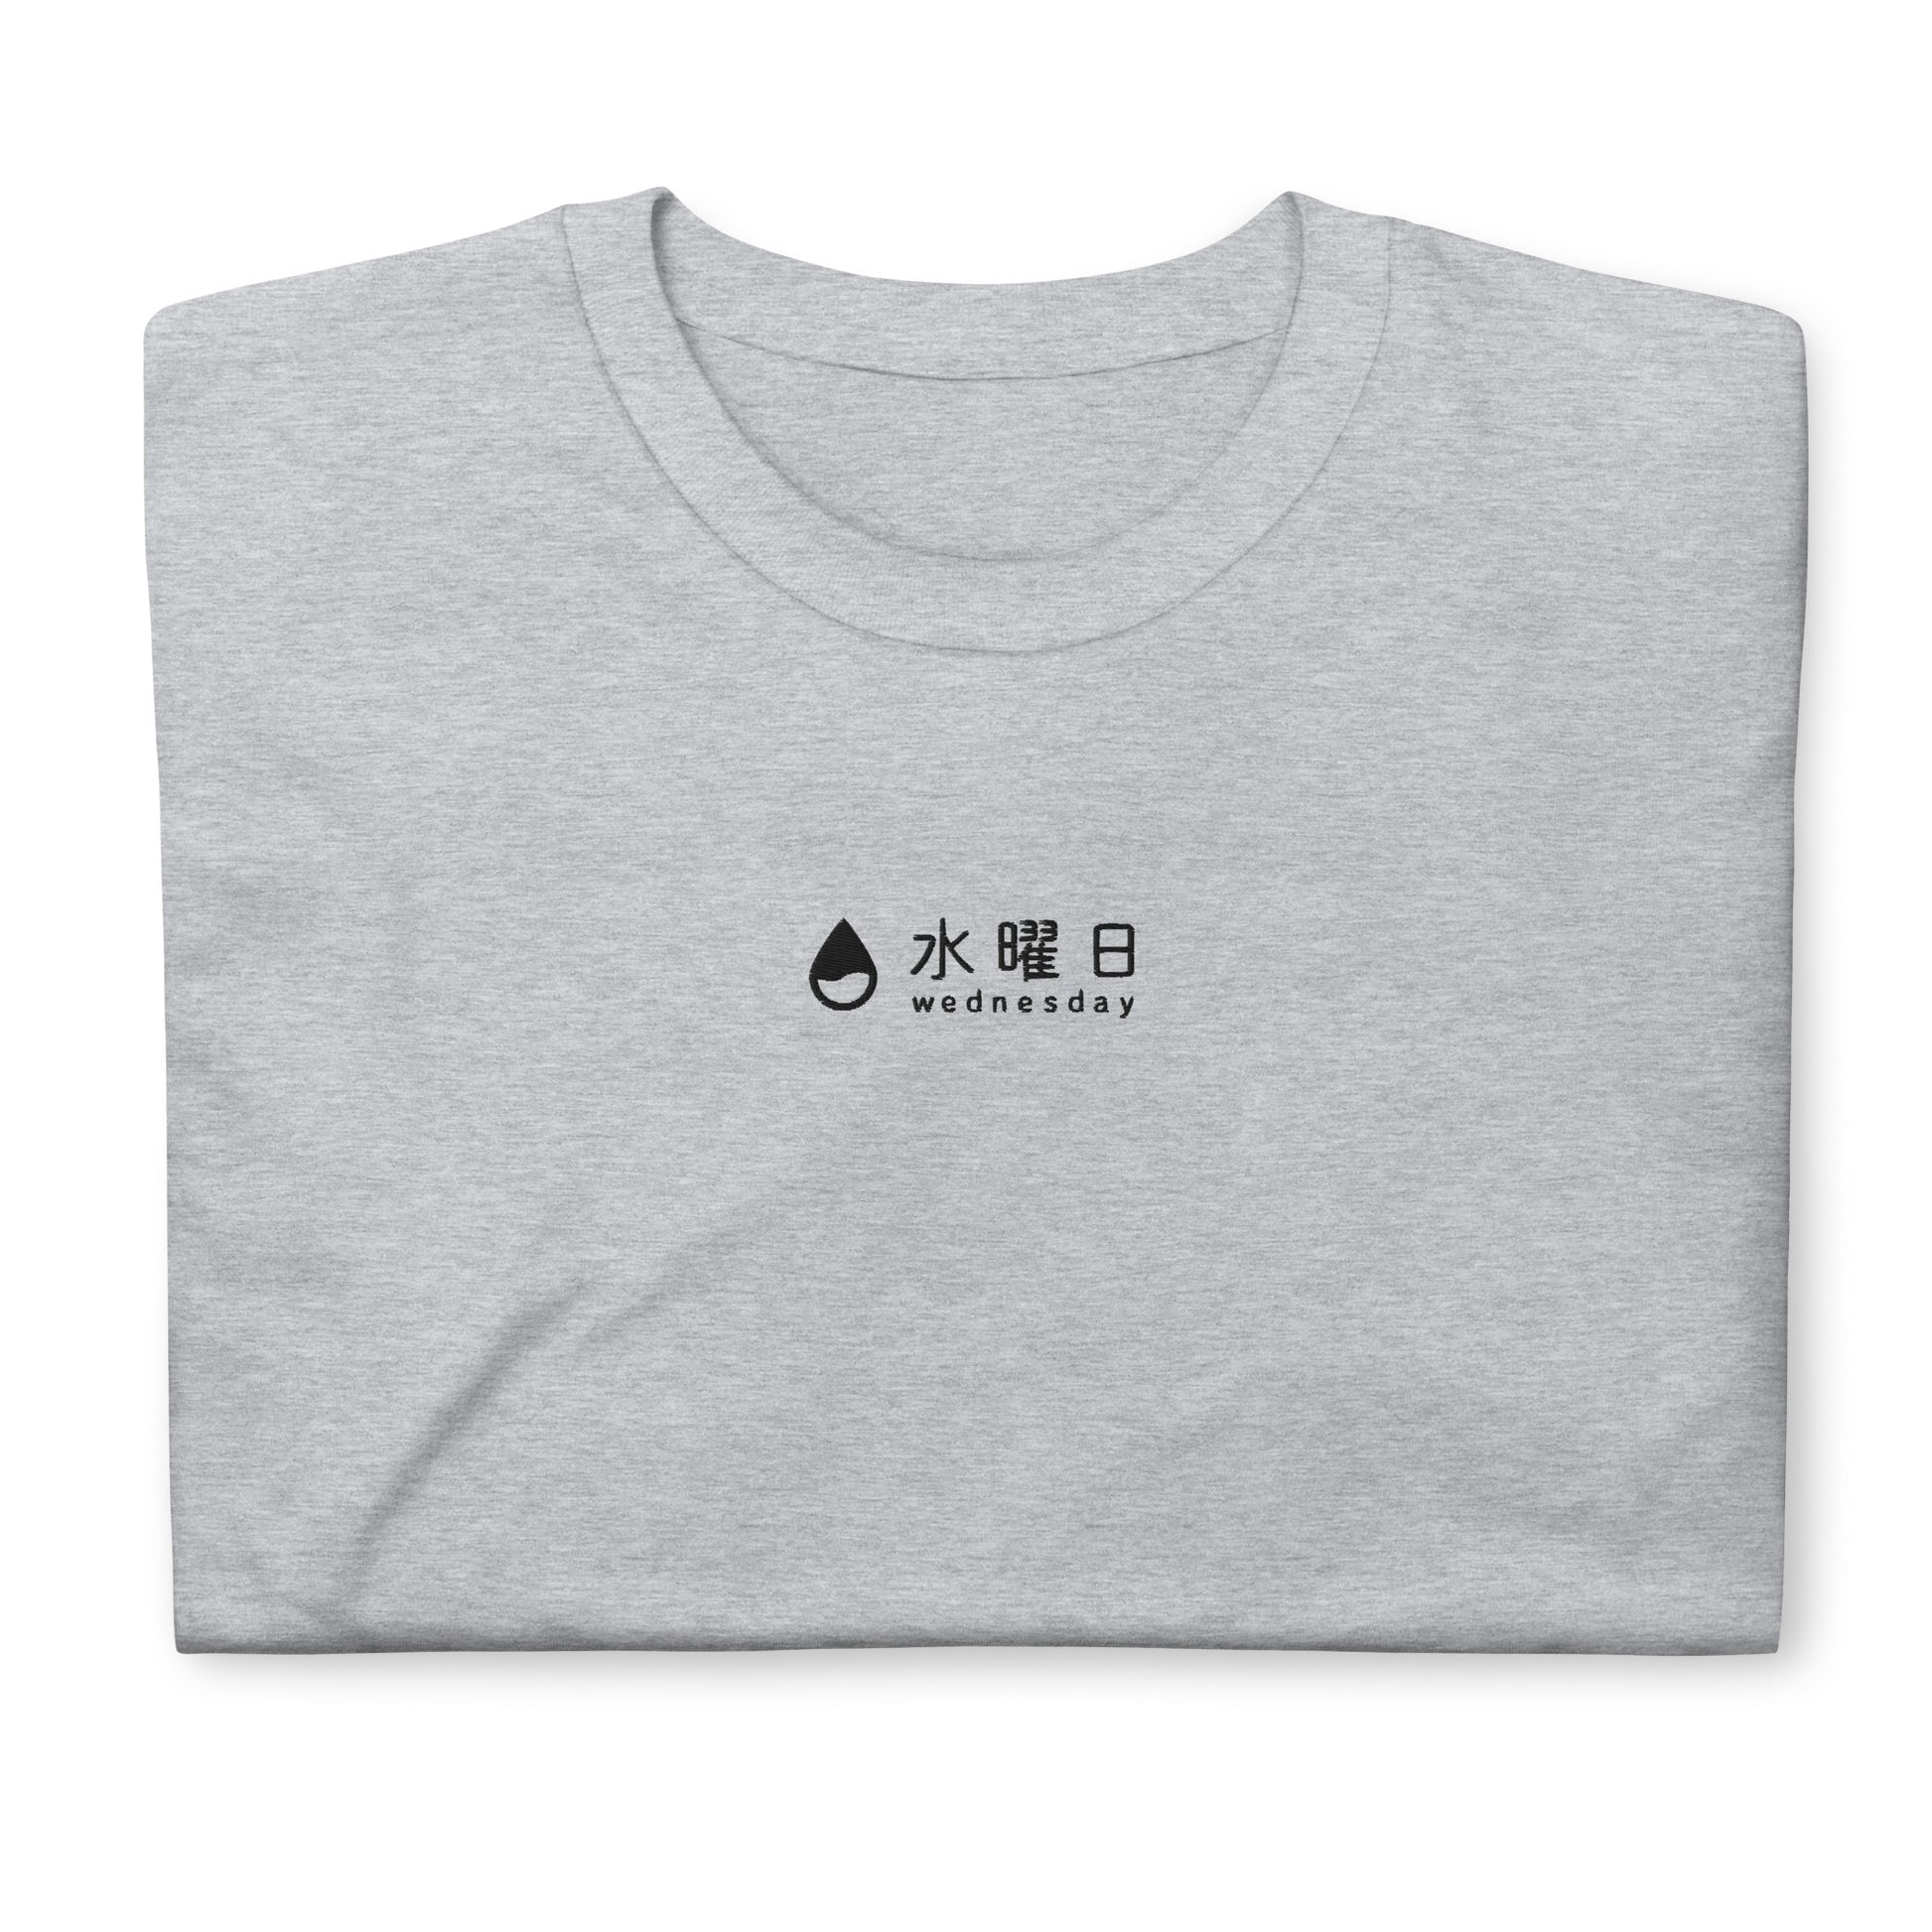 Light Gray High Quality Tee - Front Design with a white Embroidery "Wednesday" in Japanese and English  Edit alt text